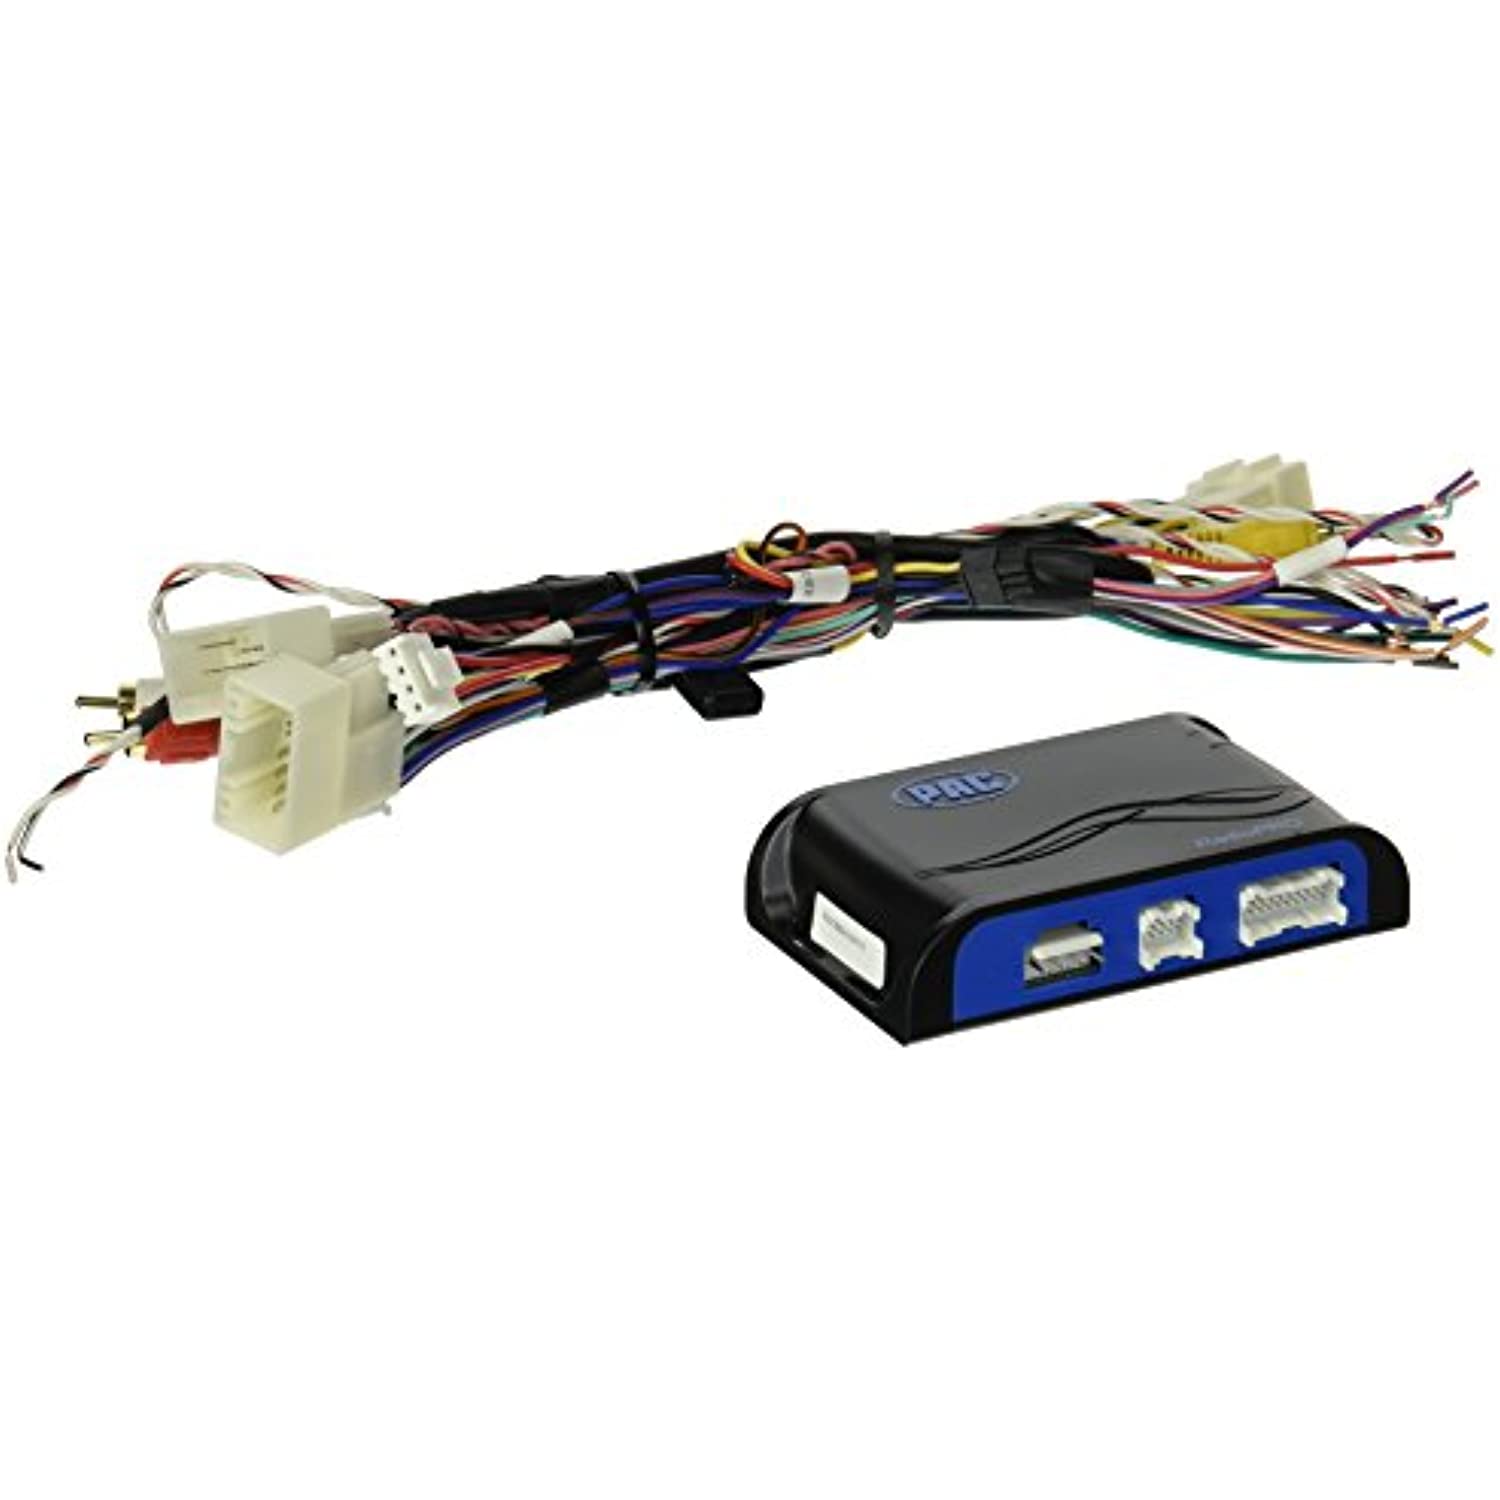 PAC RP4.2-HY11 Radiopro Radio Replacement Interface with Built In Pre-Programmed Steering Wheel Control